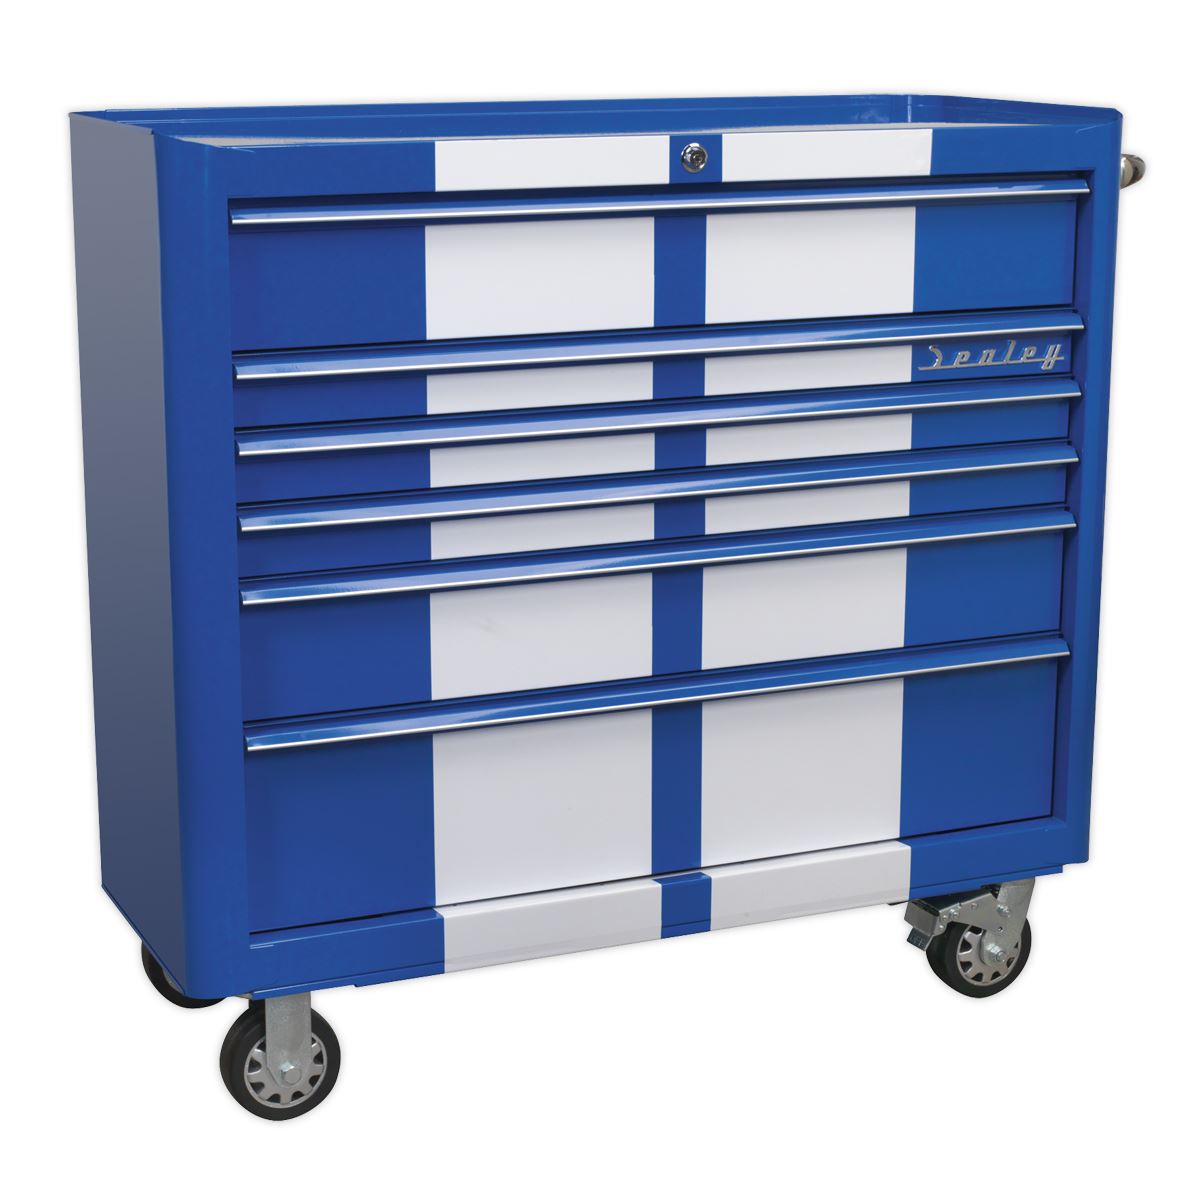 Sealey Premier Rollcab 6 Drawer Wide Retro Style - Blue with White Stripes